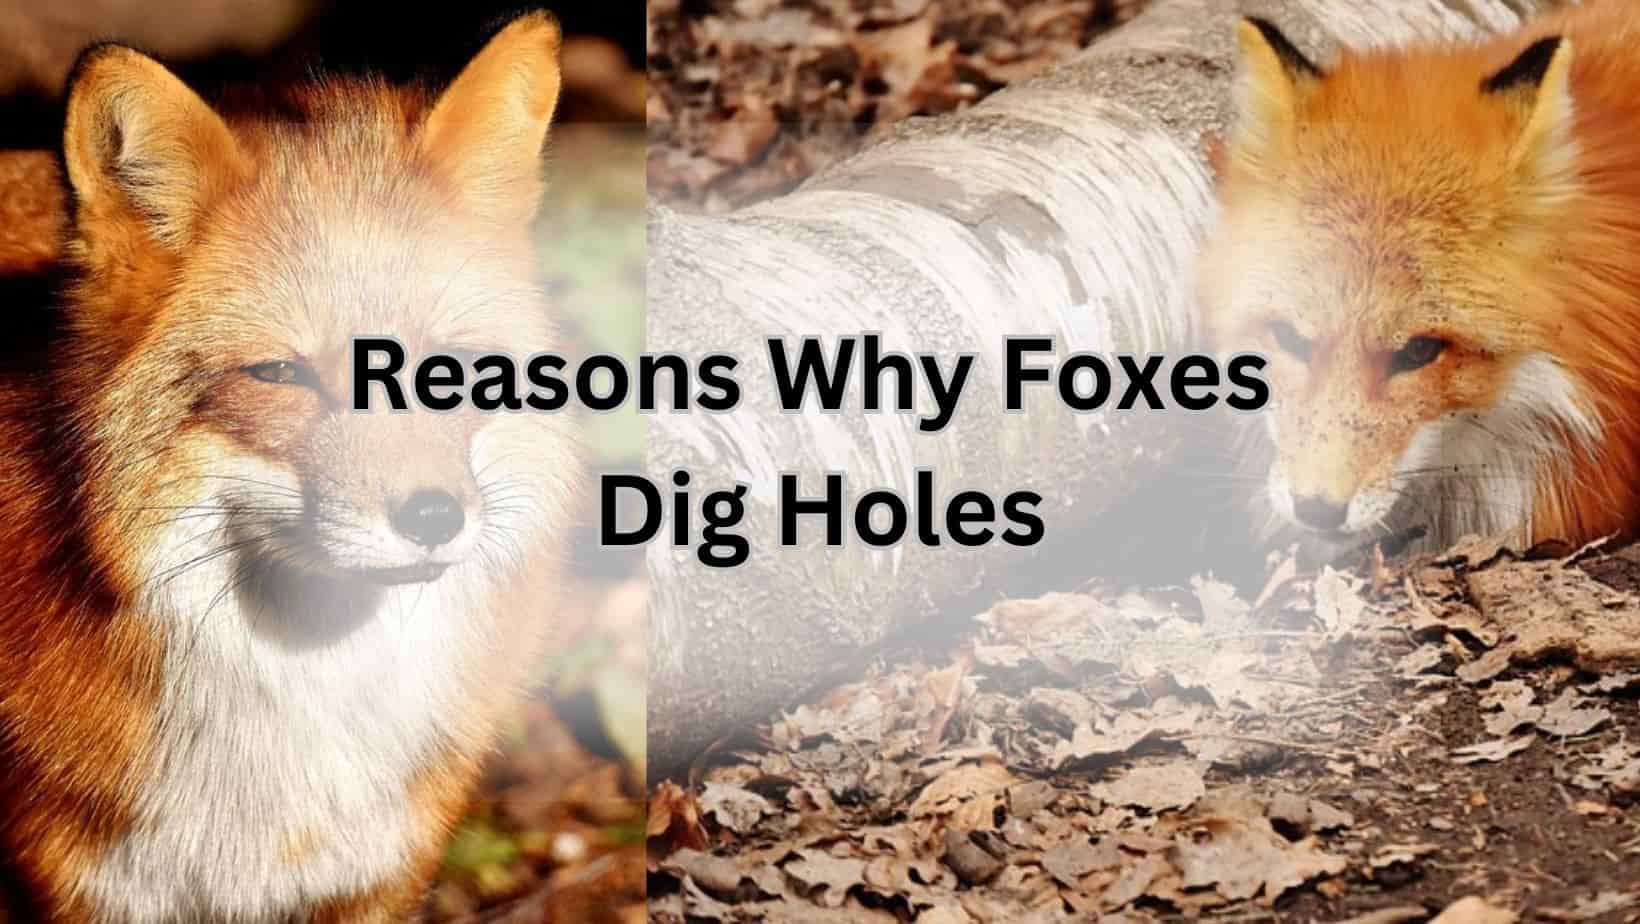 Reasons Why Foxes Dig Holes